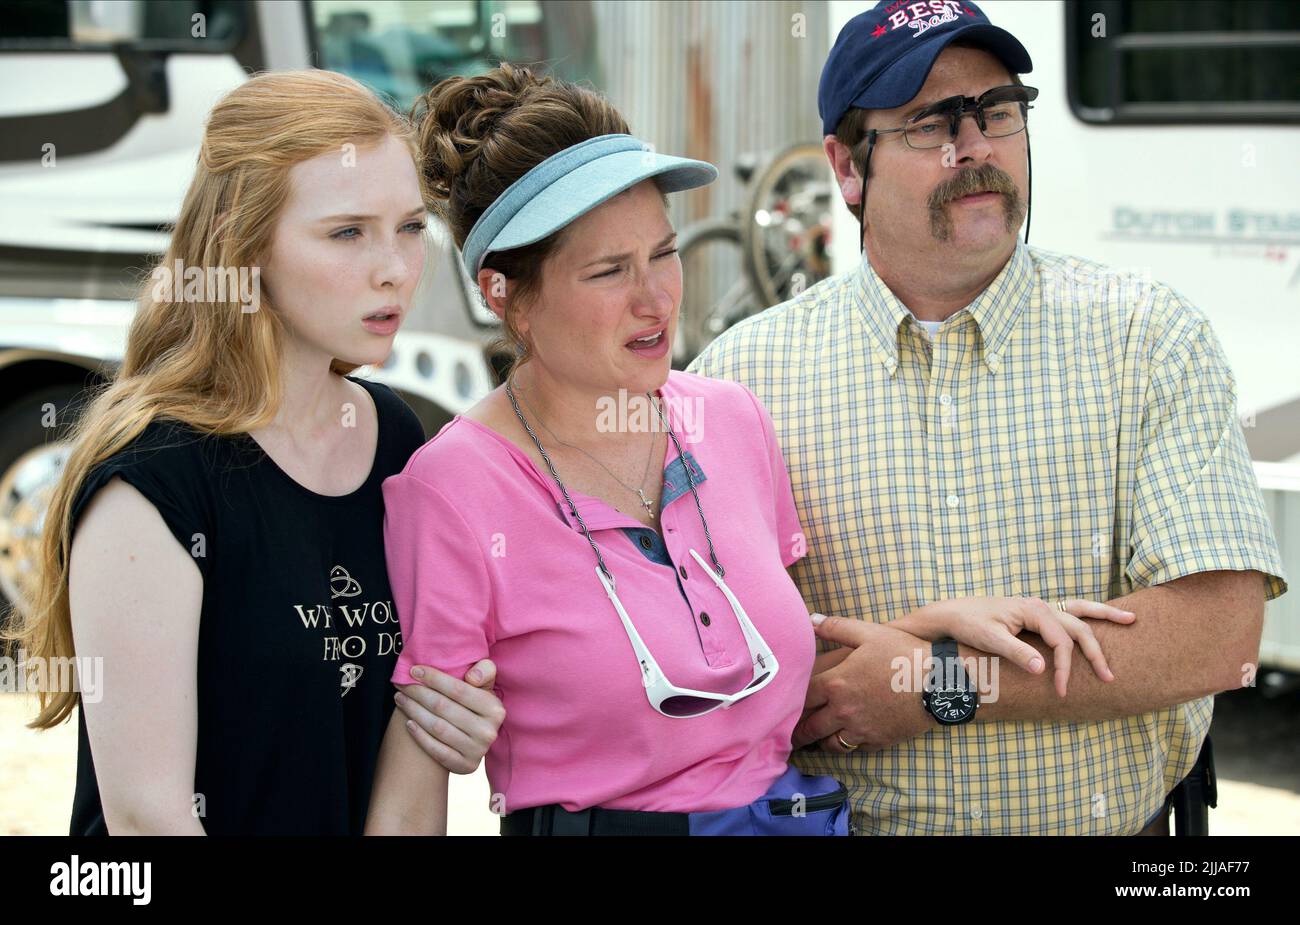 MOLLY C. QUINN, KATHRYN HAHN, NICK OFFERMAN, WE'RE THE MILLERS, 2013 Stock Photo